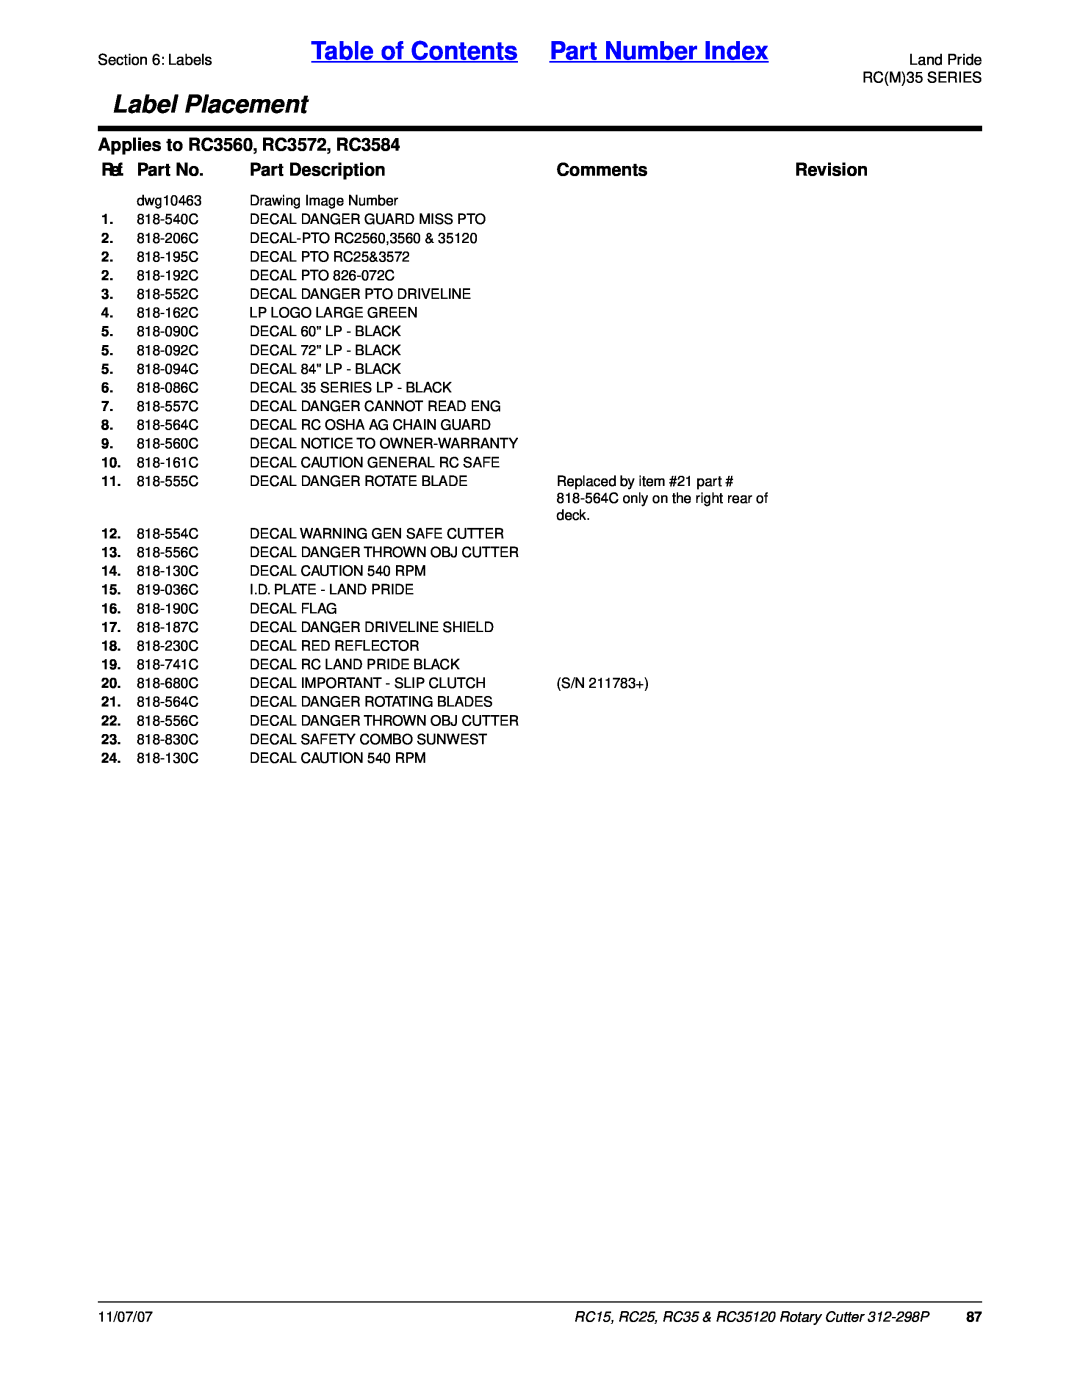 Land Pride RC15 Table of Contents Part Number Index, Label Placement, Applies to RC3560, RC3572, RC3584, Ref. Part No 